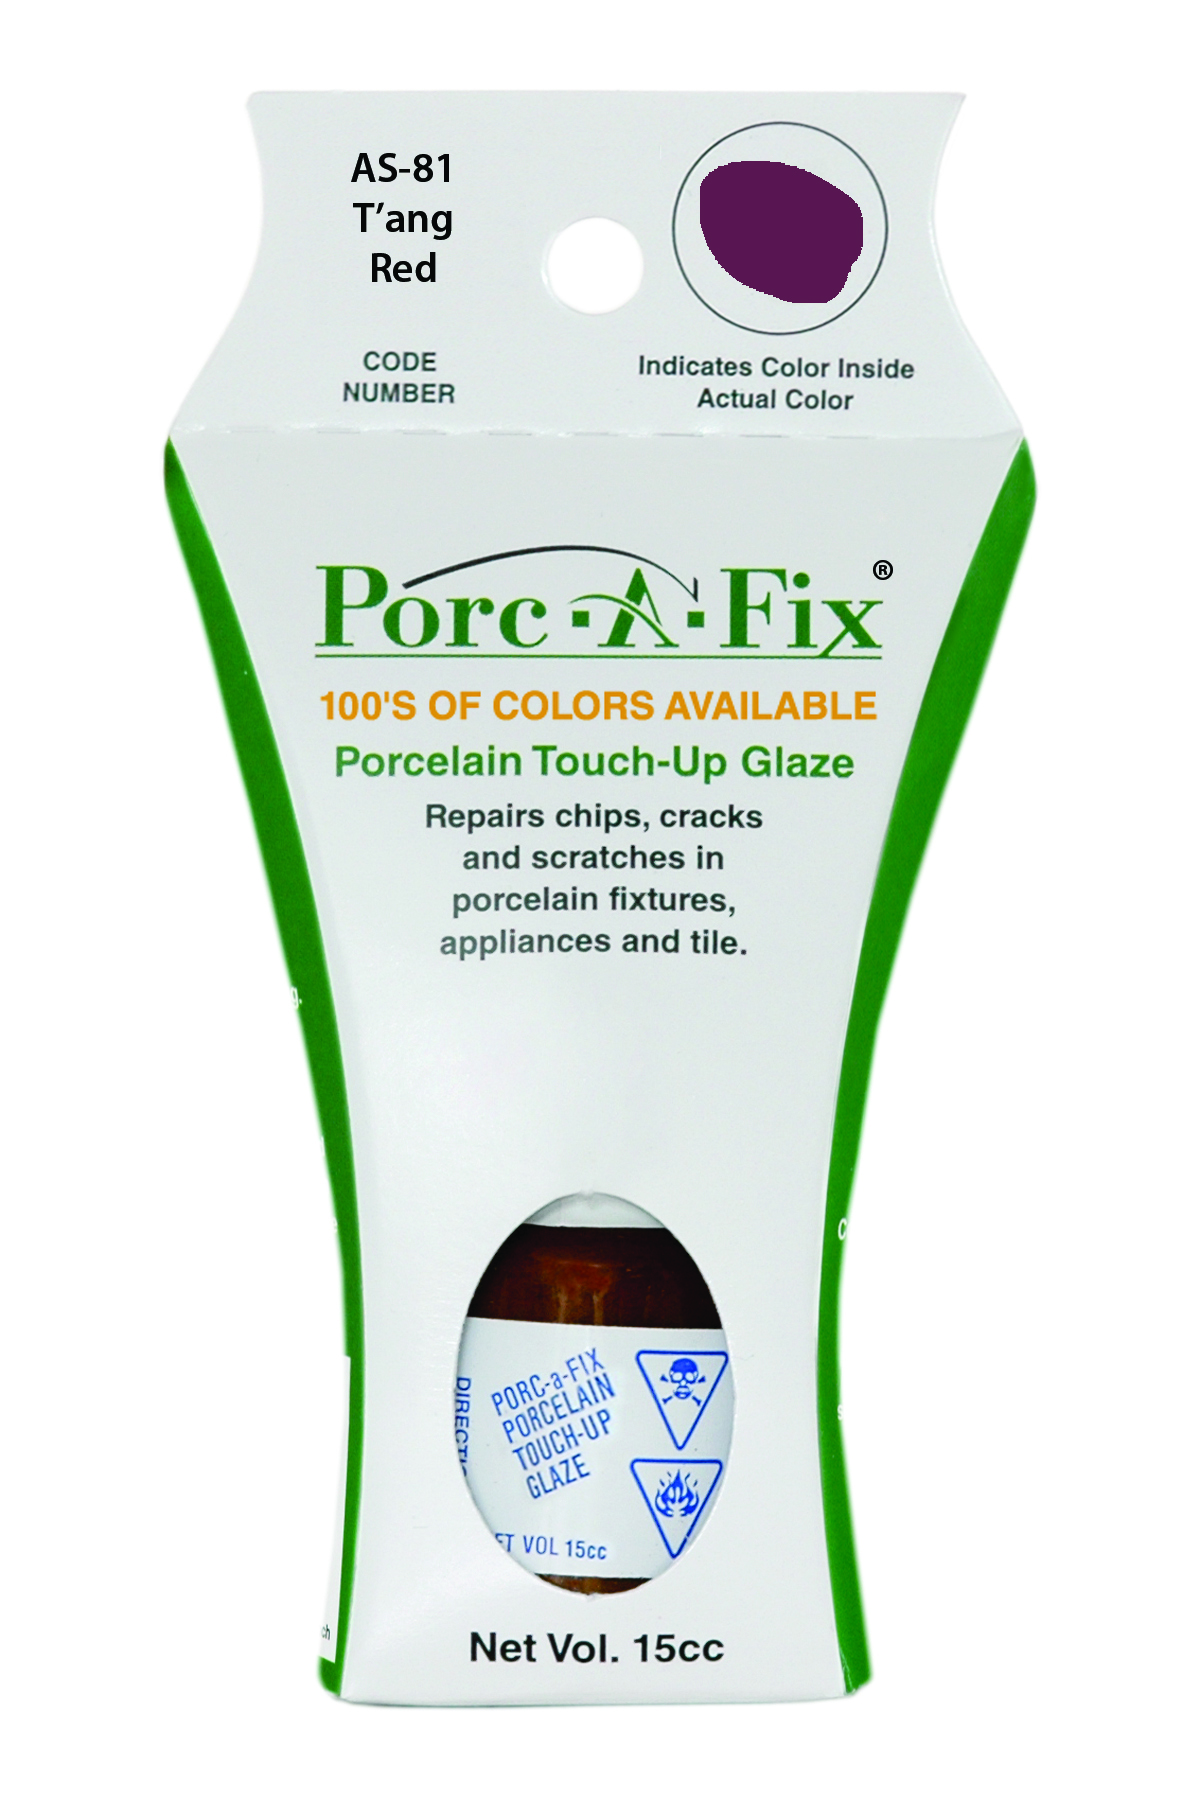 Fixture-Fix | AS-81 | Porc-A-Fix Touch-Up Glaze American Standard T'ang Red - Compatible with American Standard 070900-0380A Touch Up Paint Kit - T'ANG RED